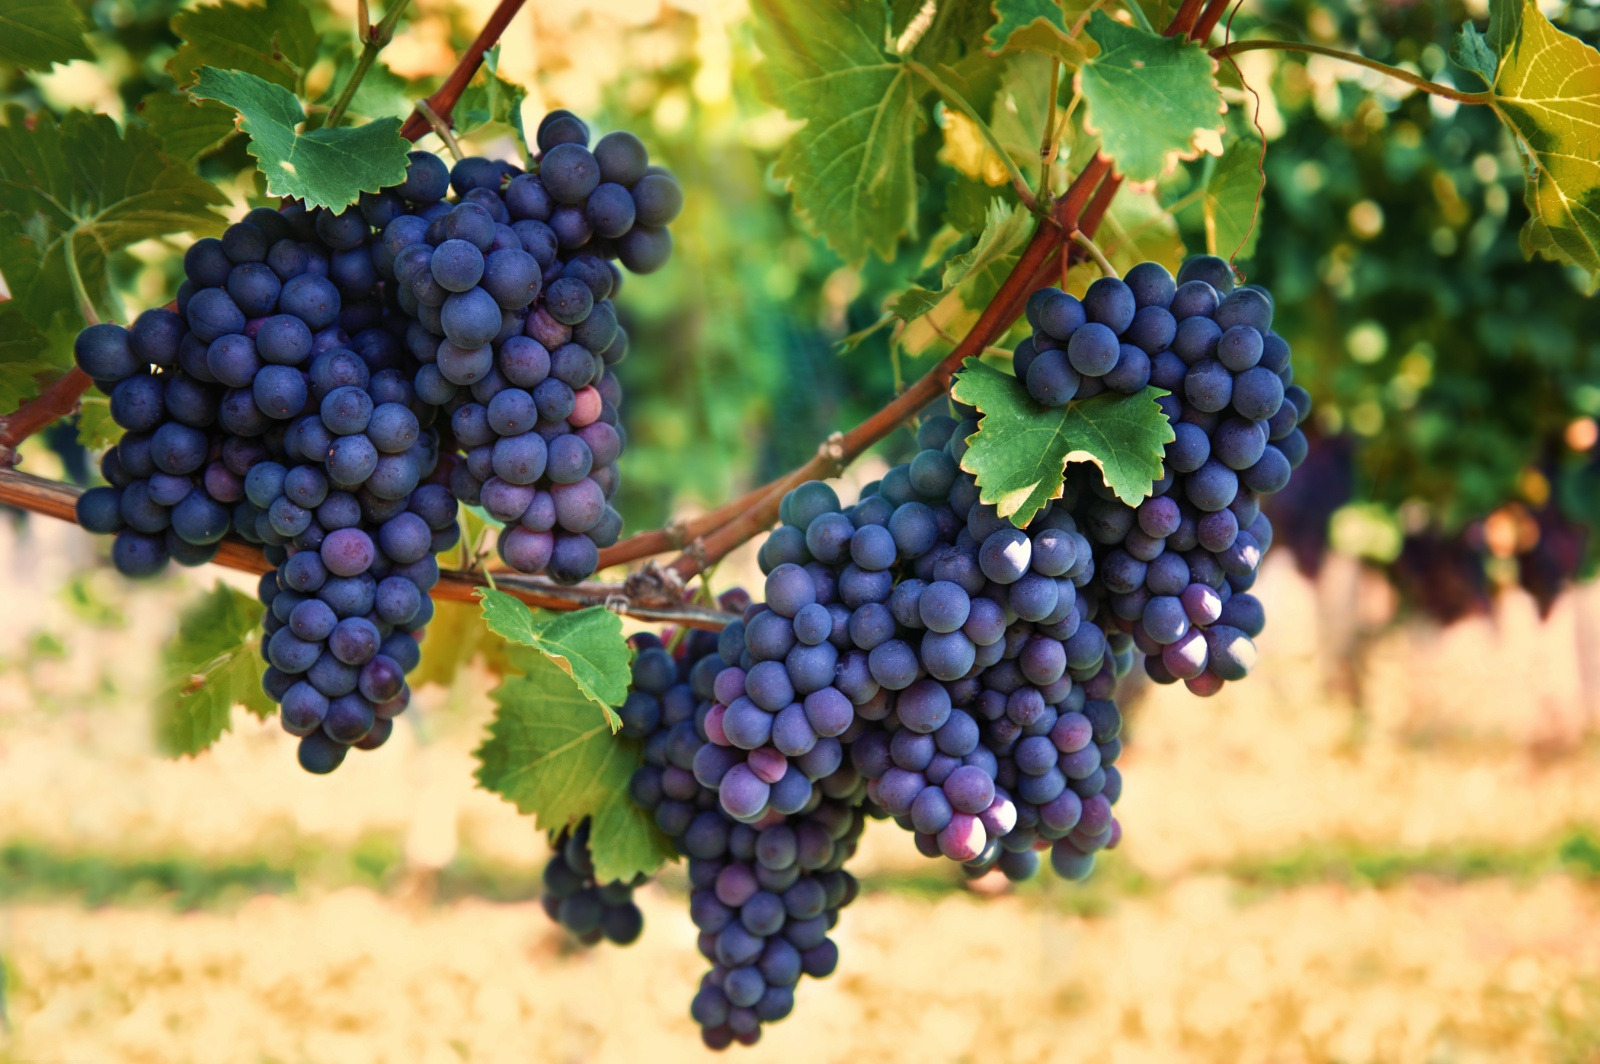 Resonon Hyperspectral Imaging Systems have been used to scan grapes